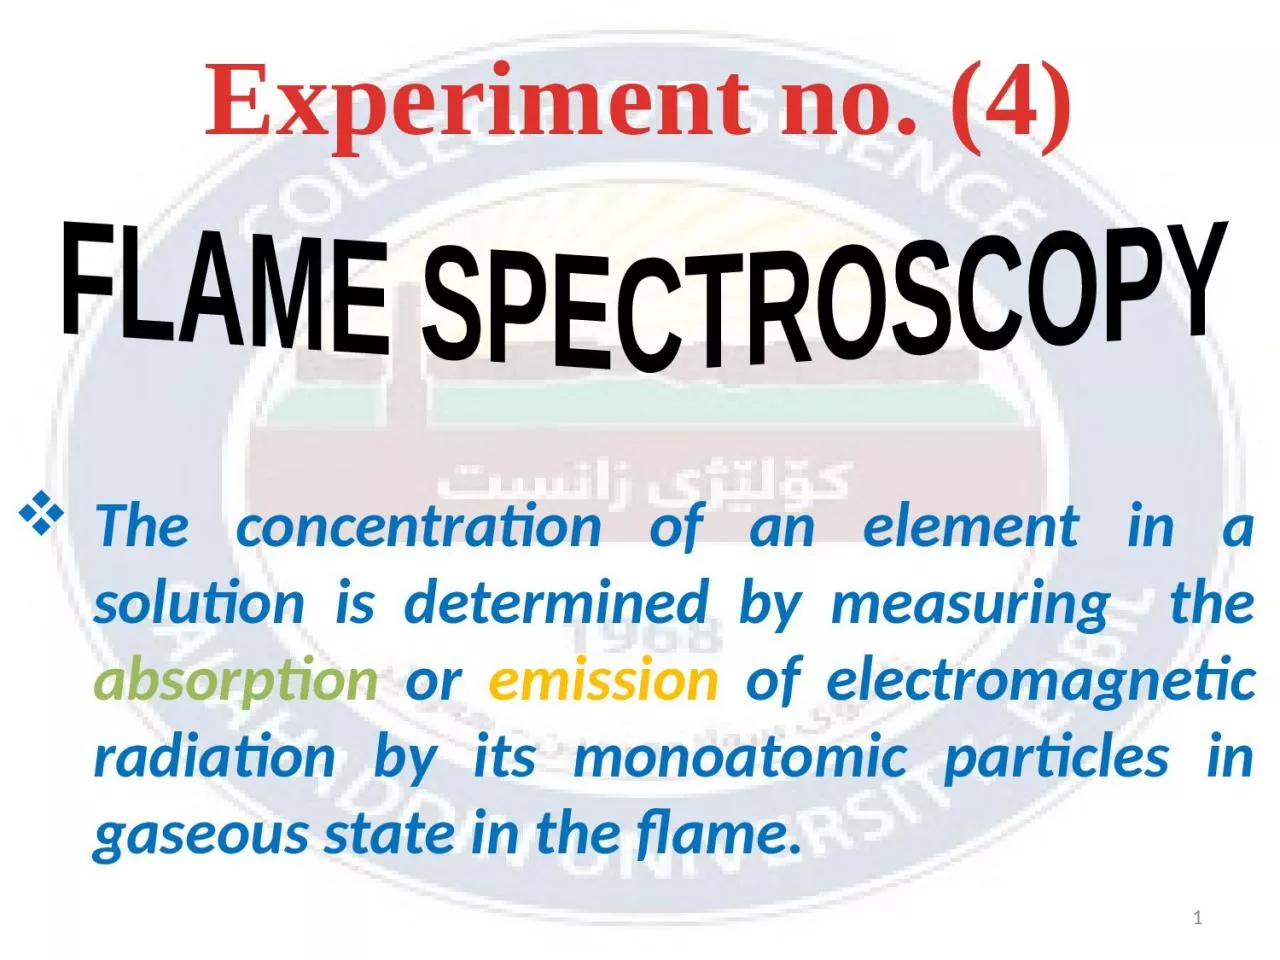 The concentration of an element in a solution is determined by measuring  the